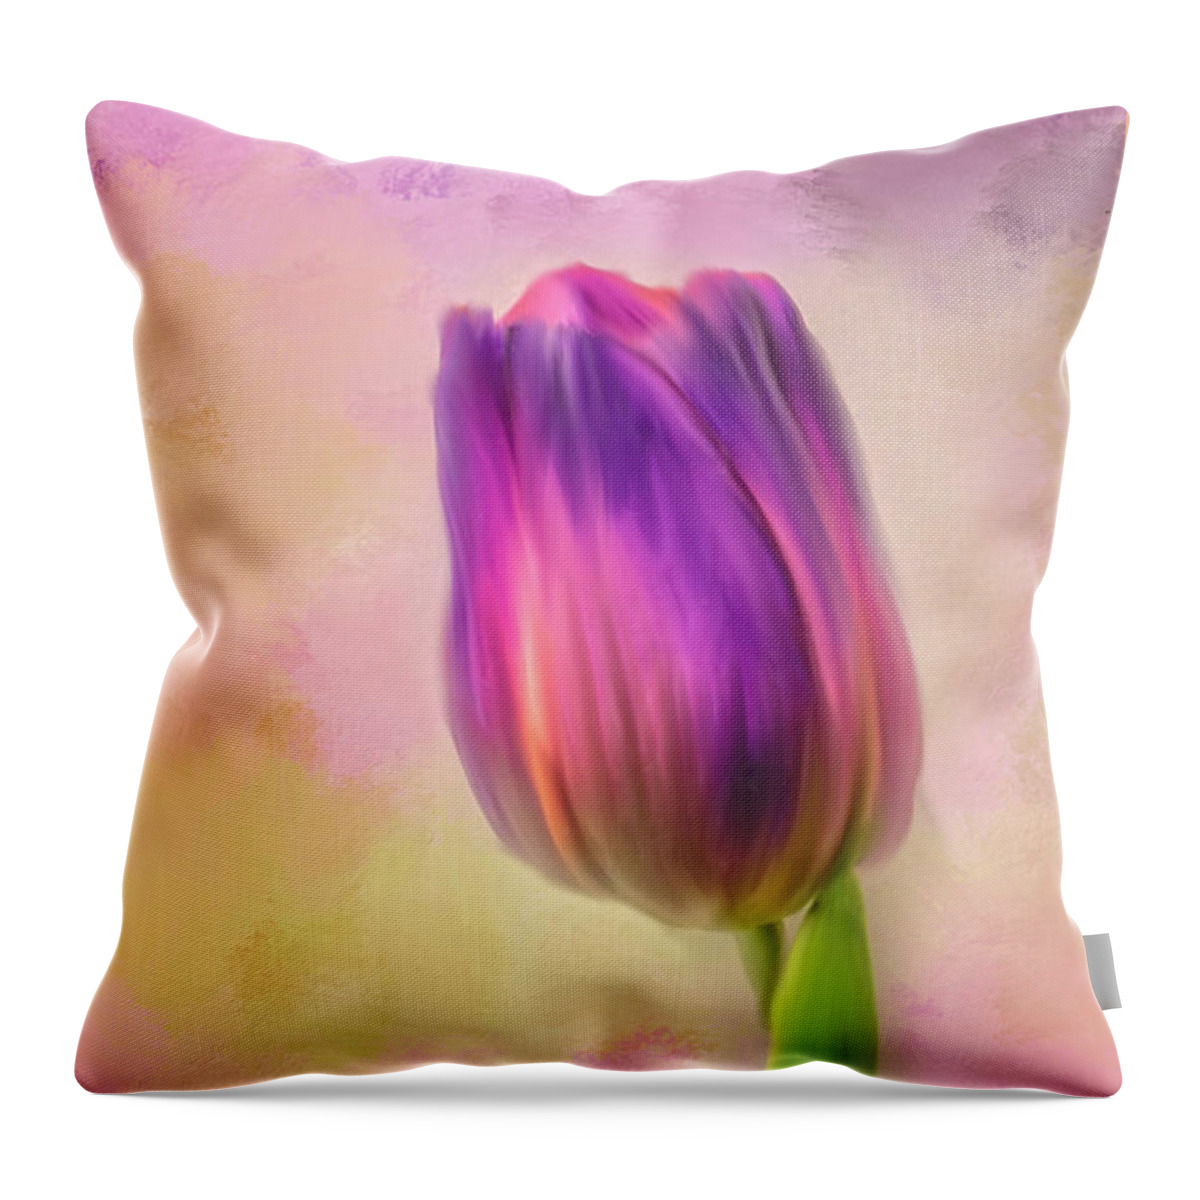 Pink Tulip Throw Pillow featuring the photograph Single Tulip by Mary Timman